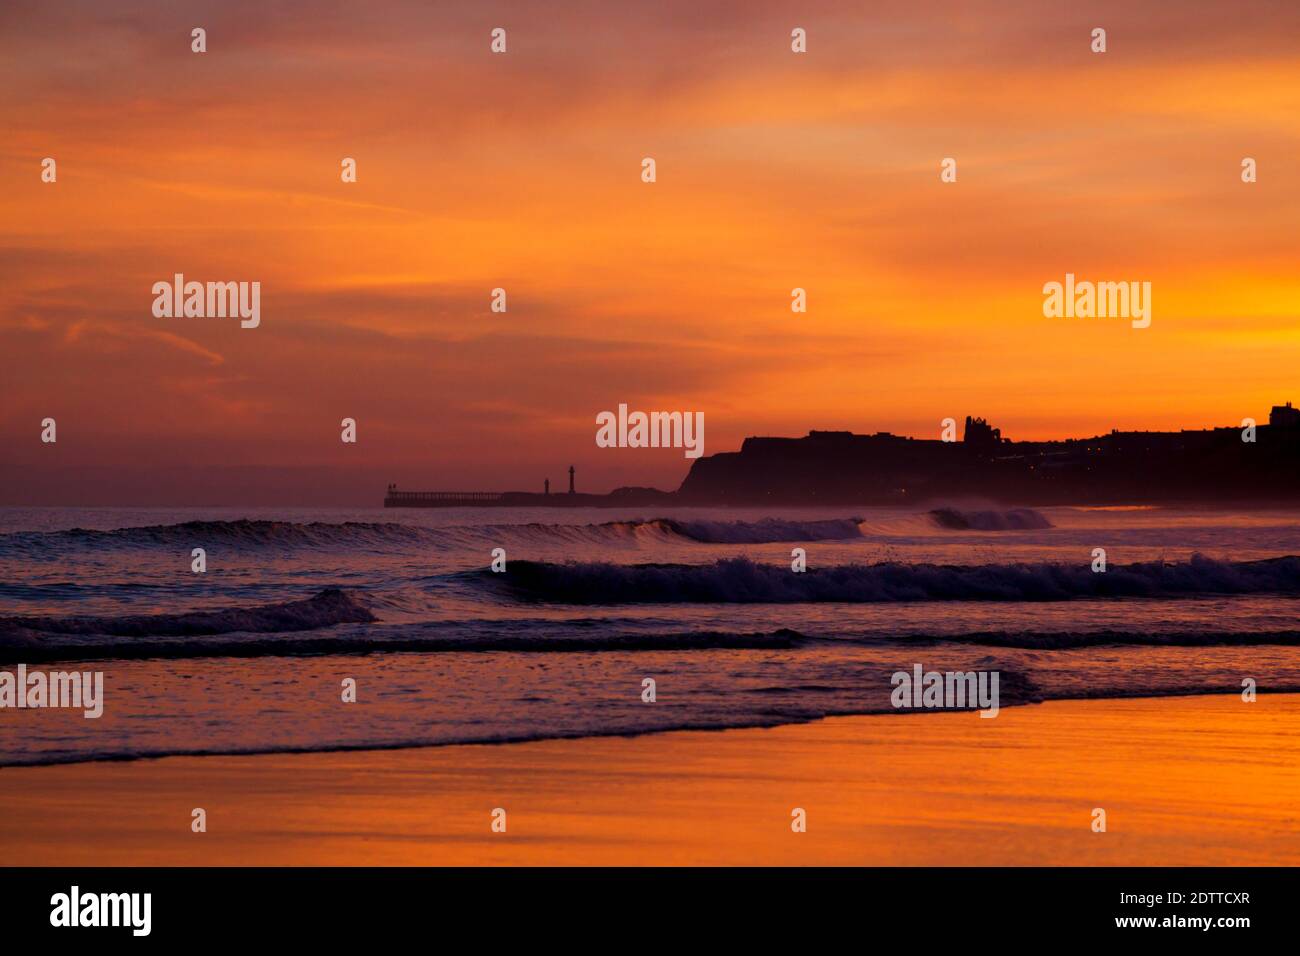 Daybreak view looking towards Whitby showing pier and abbey in silhouette against a colourful sky reflected on wet sand.  Viewed from Sandsend. Stock Photo